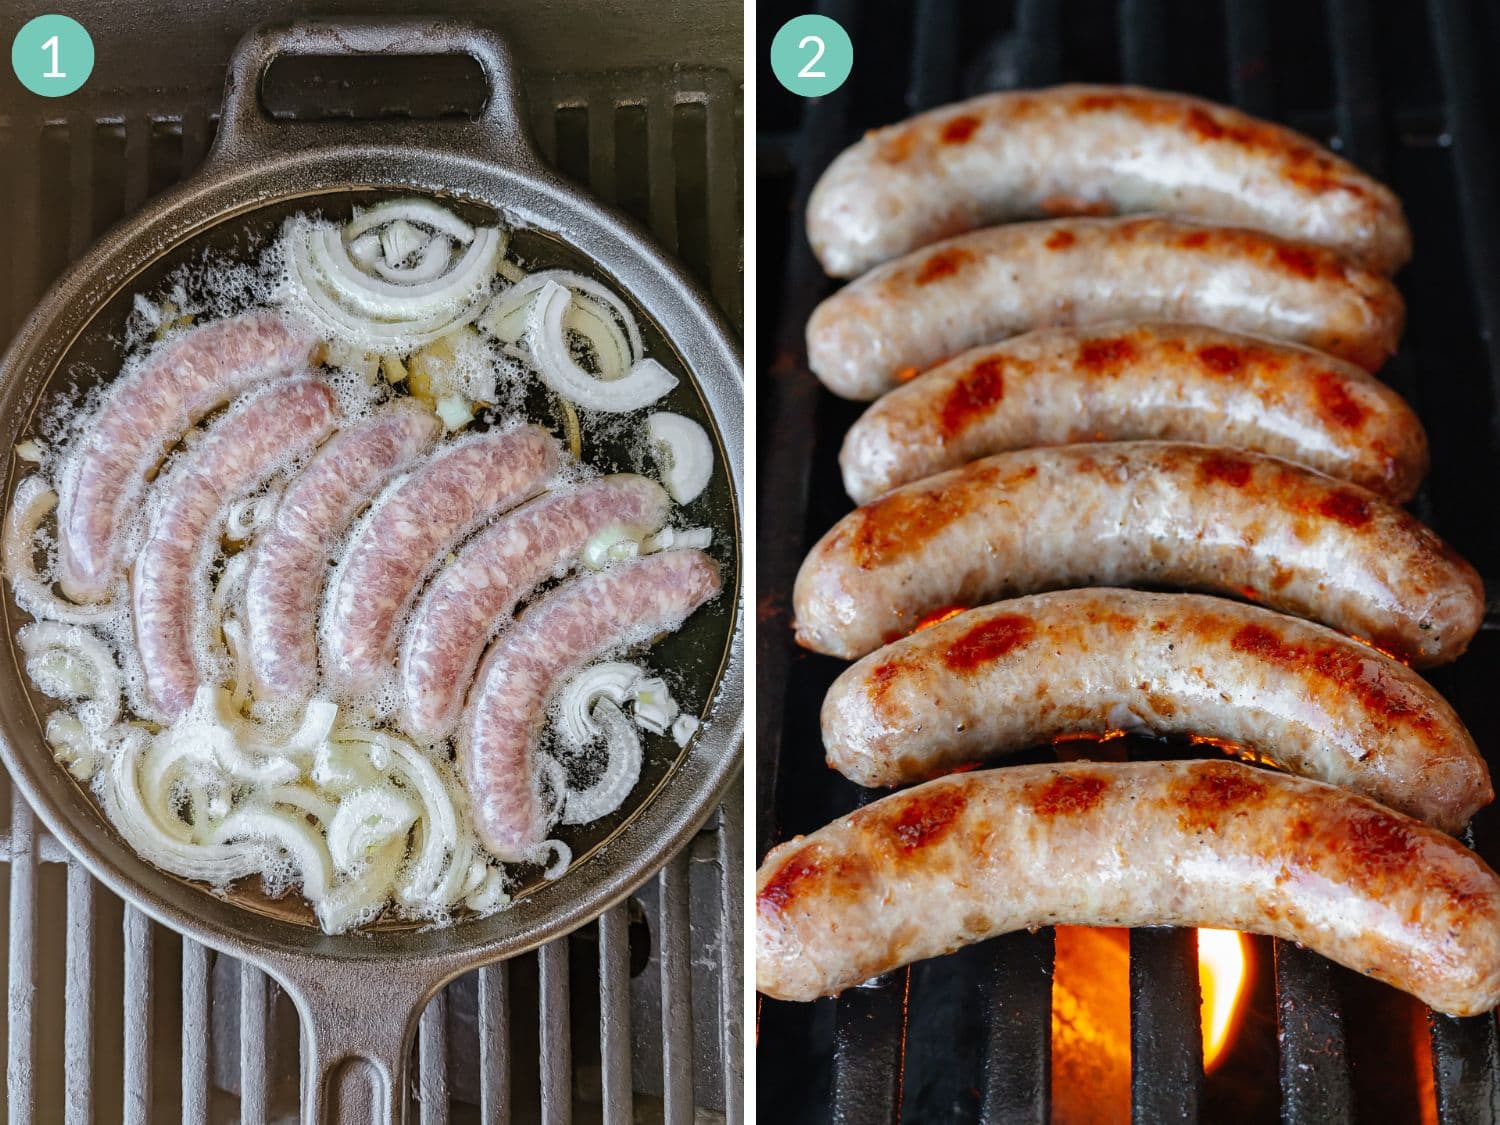 Numbered photo collage showing the simmer and grill method for cooking brats.